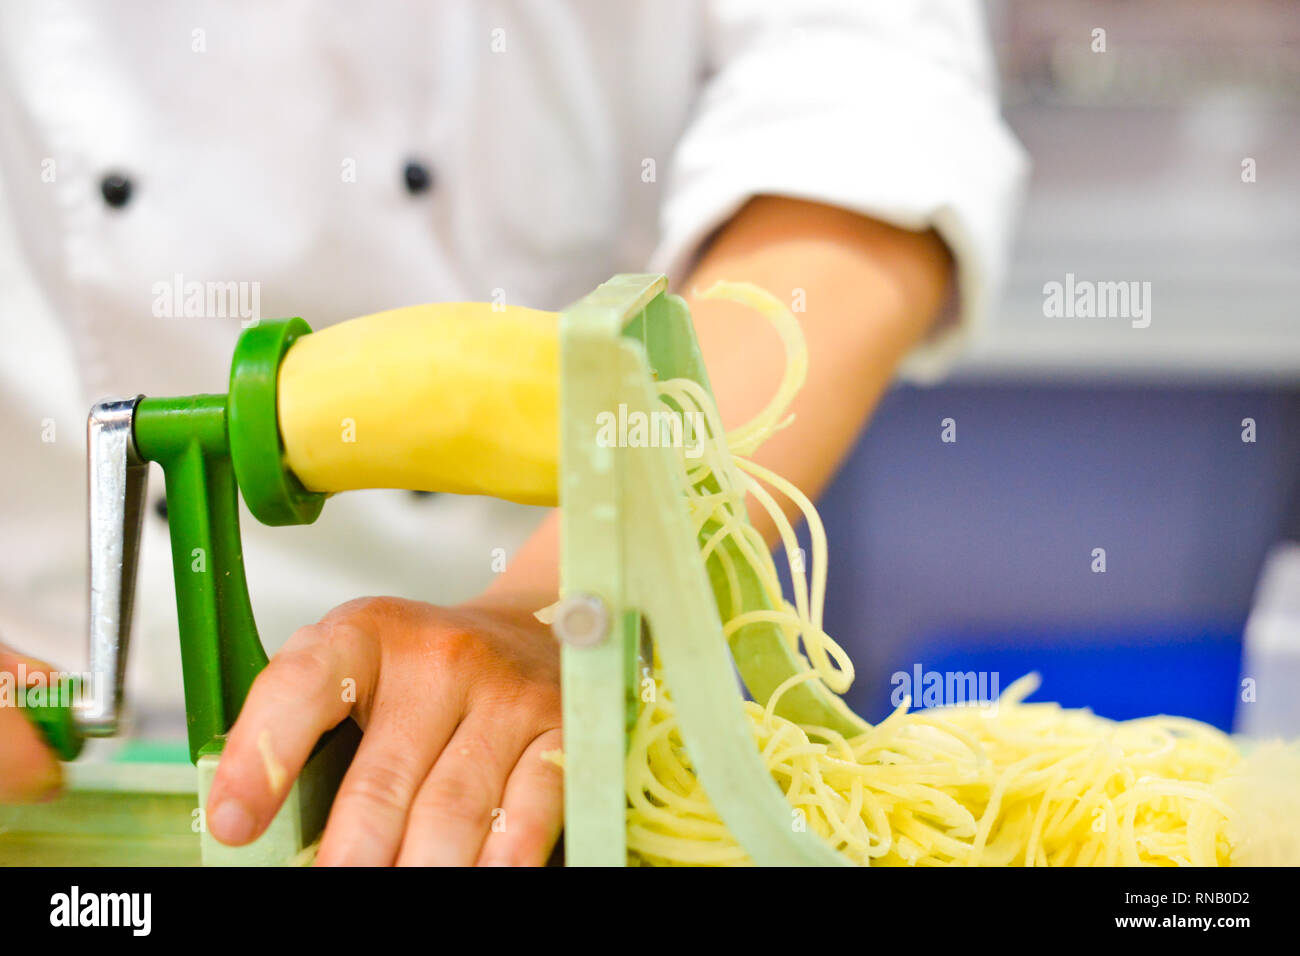 Turning the Handle of a Vegetable Spiralizer, Slicer To Make Homemade Zucchini  Noodles Stock Photo - Image of meal, food: 212127480